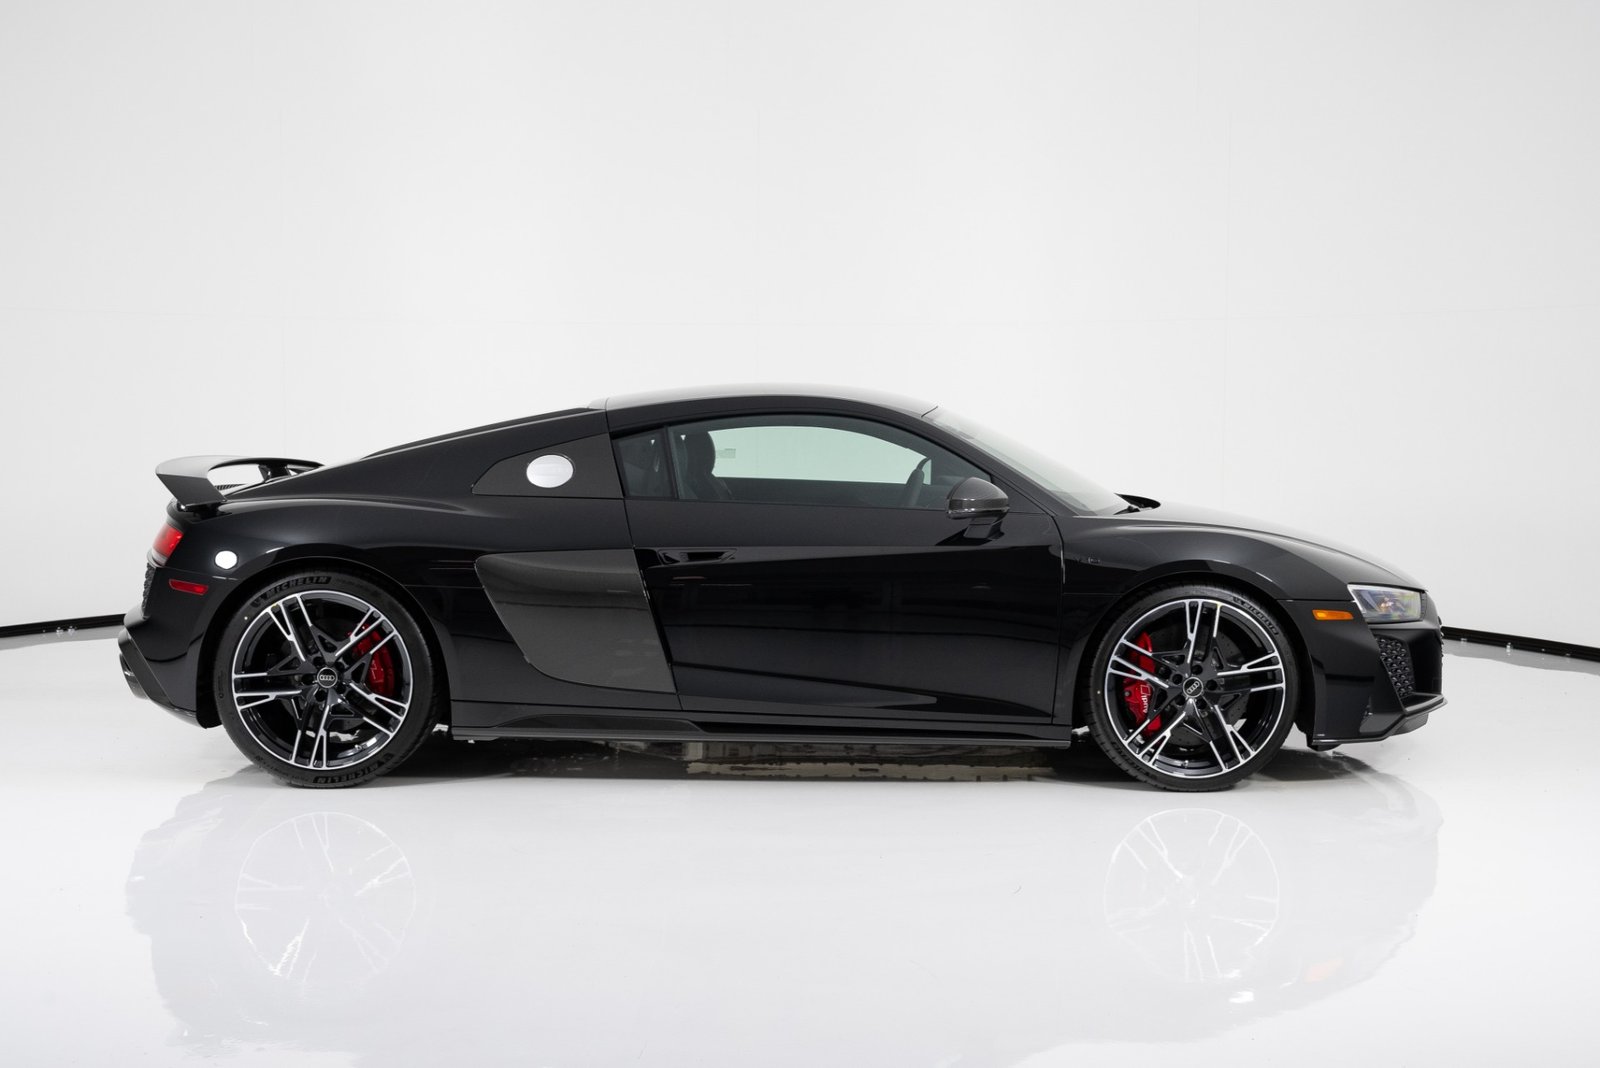 New 2023 AUDI R8 COUPE V10 PERFORMANCE ALL WHEEL DRIVE (26)